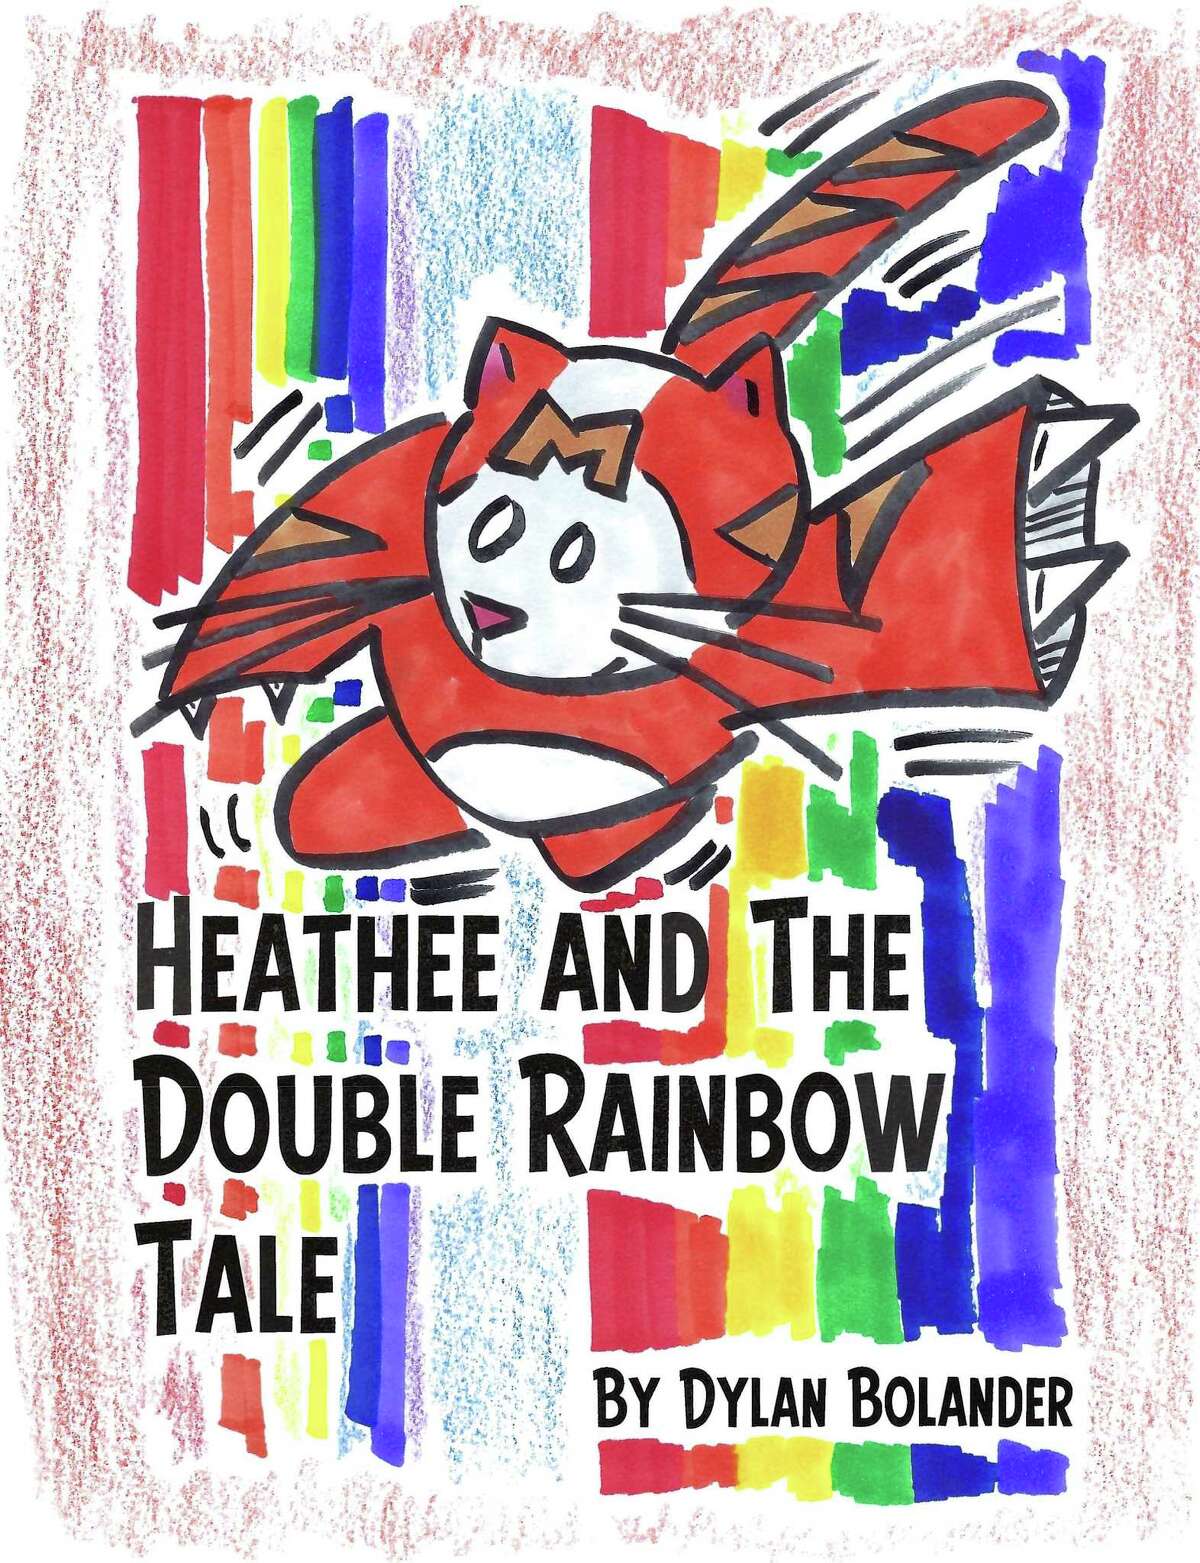 Retired Air Force Master Sgt. Dylan Bolander rescued a kitten he named “Heath” in San Antonio in 2015. “Heath” inspired Bolander to write and illustrate a children’s book about resilience and positivity called “Heathee and the Double Rainbow Tale.”